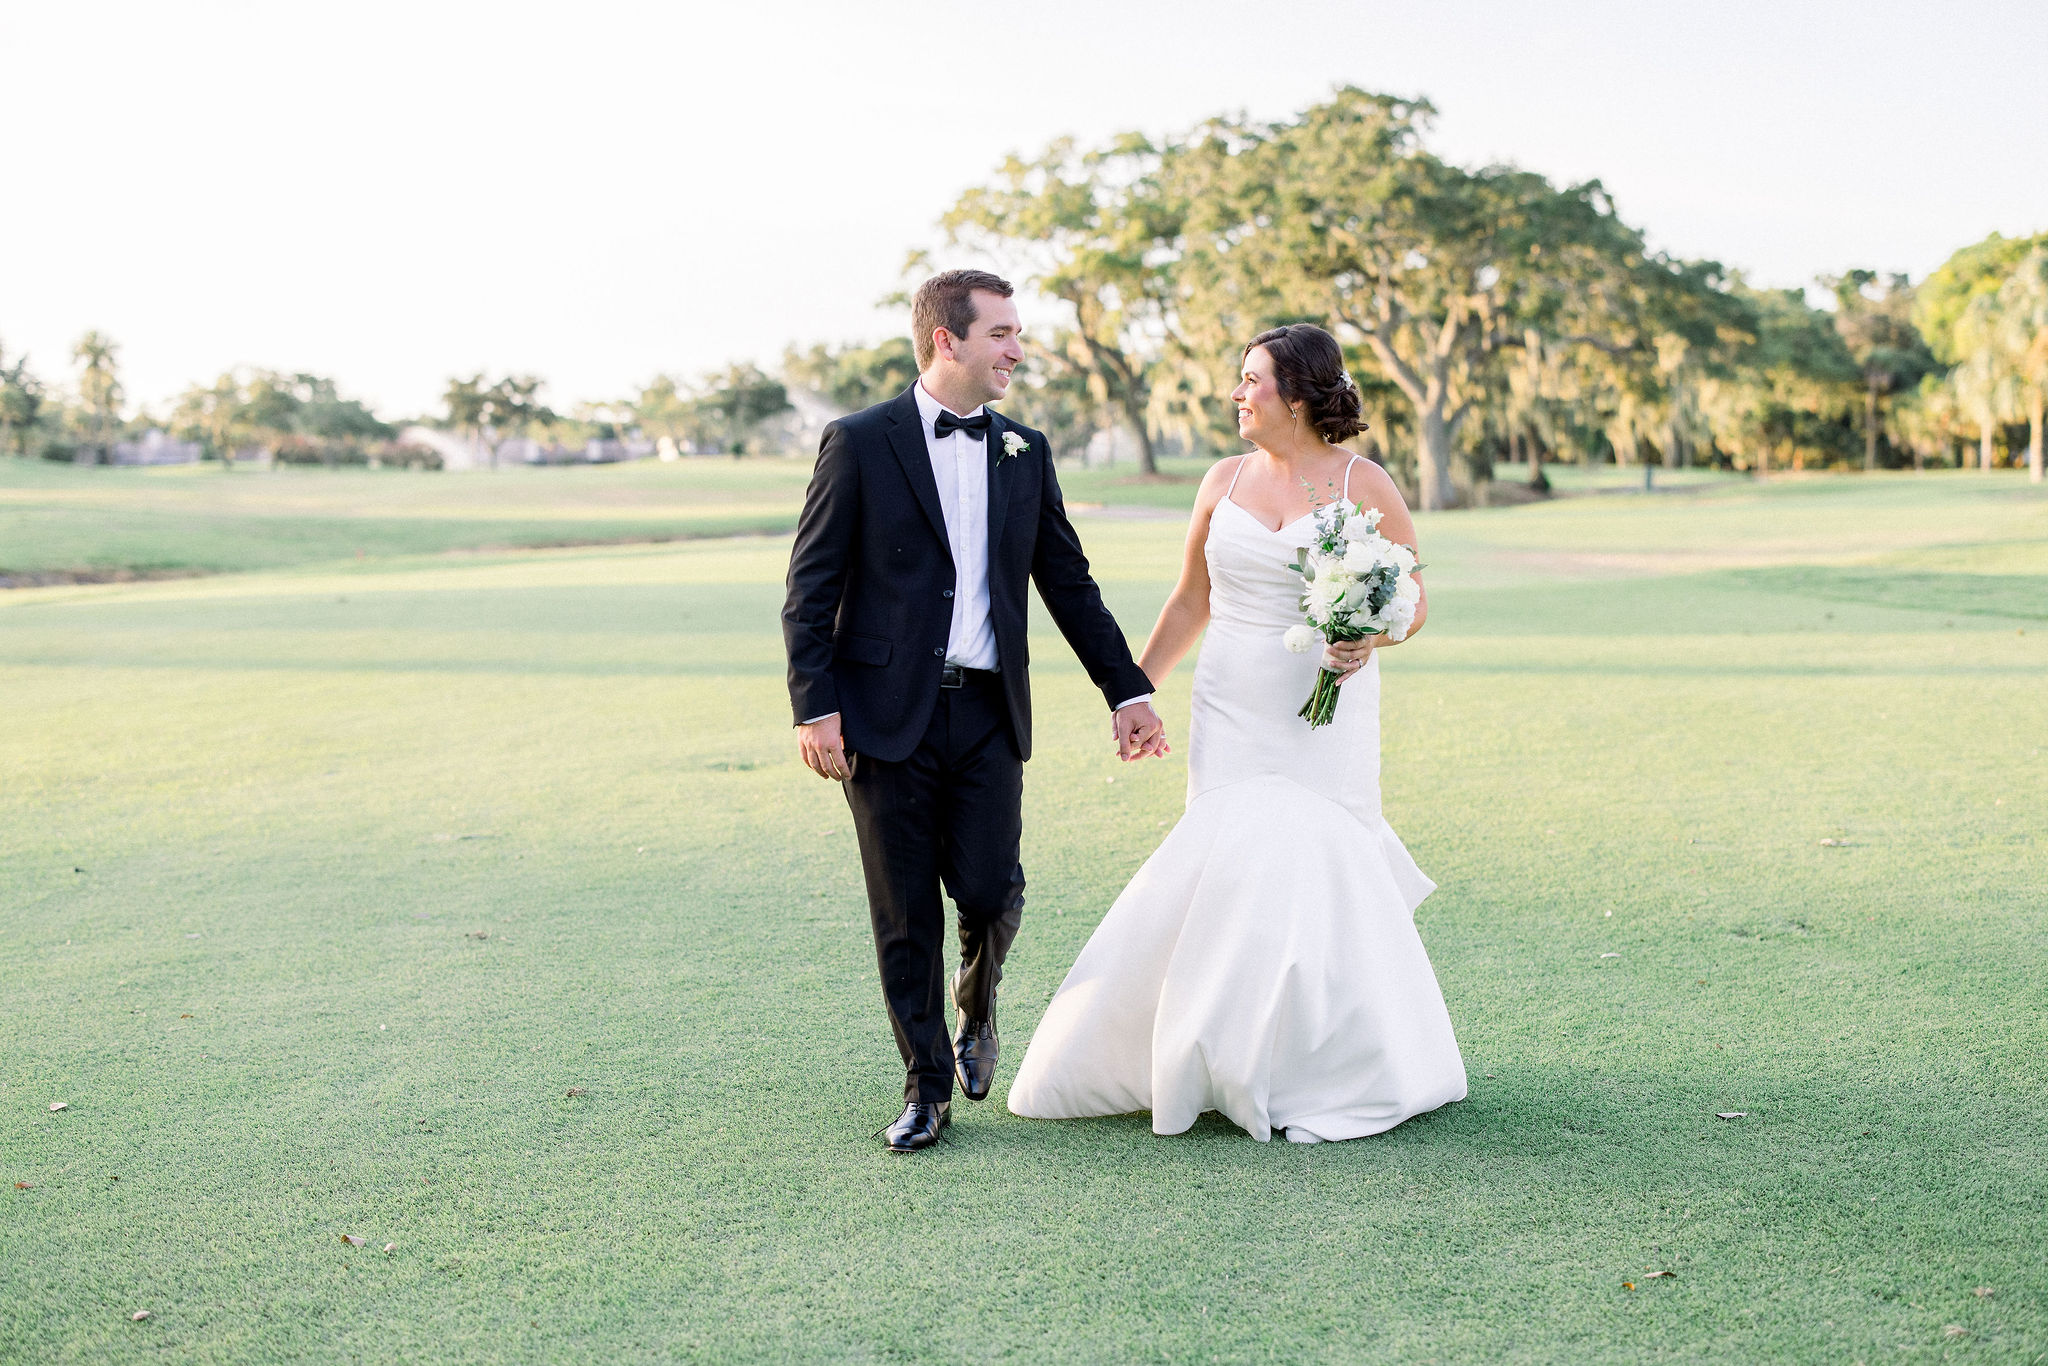 At the Bradenton, Florida IMG Golf Course a newlywed couple hold hands and smile at one another captured by Jommy Photography. Professional wedding photographer captures a bride and groom on their happy day.
